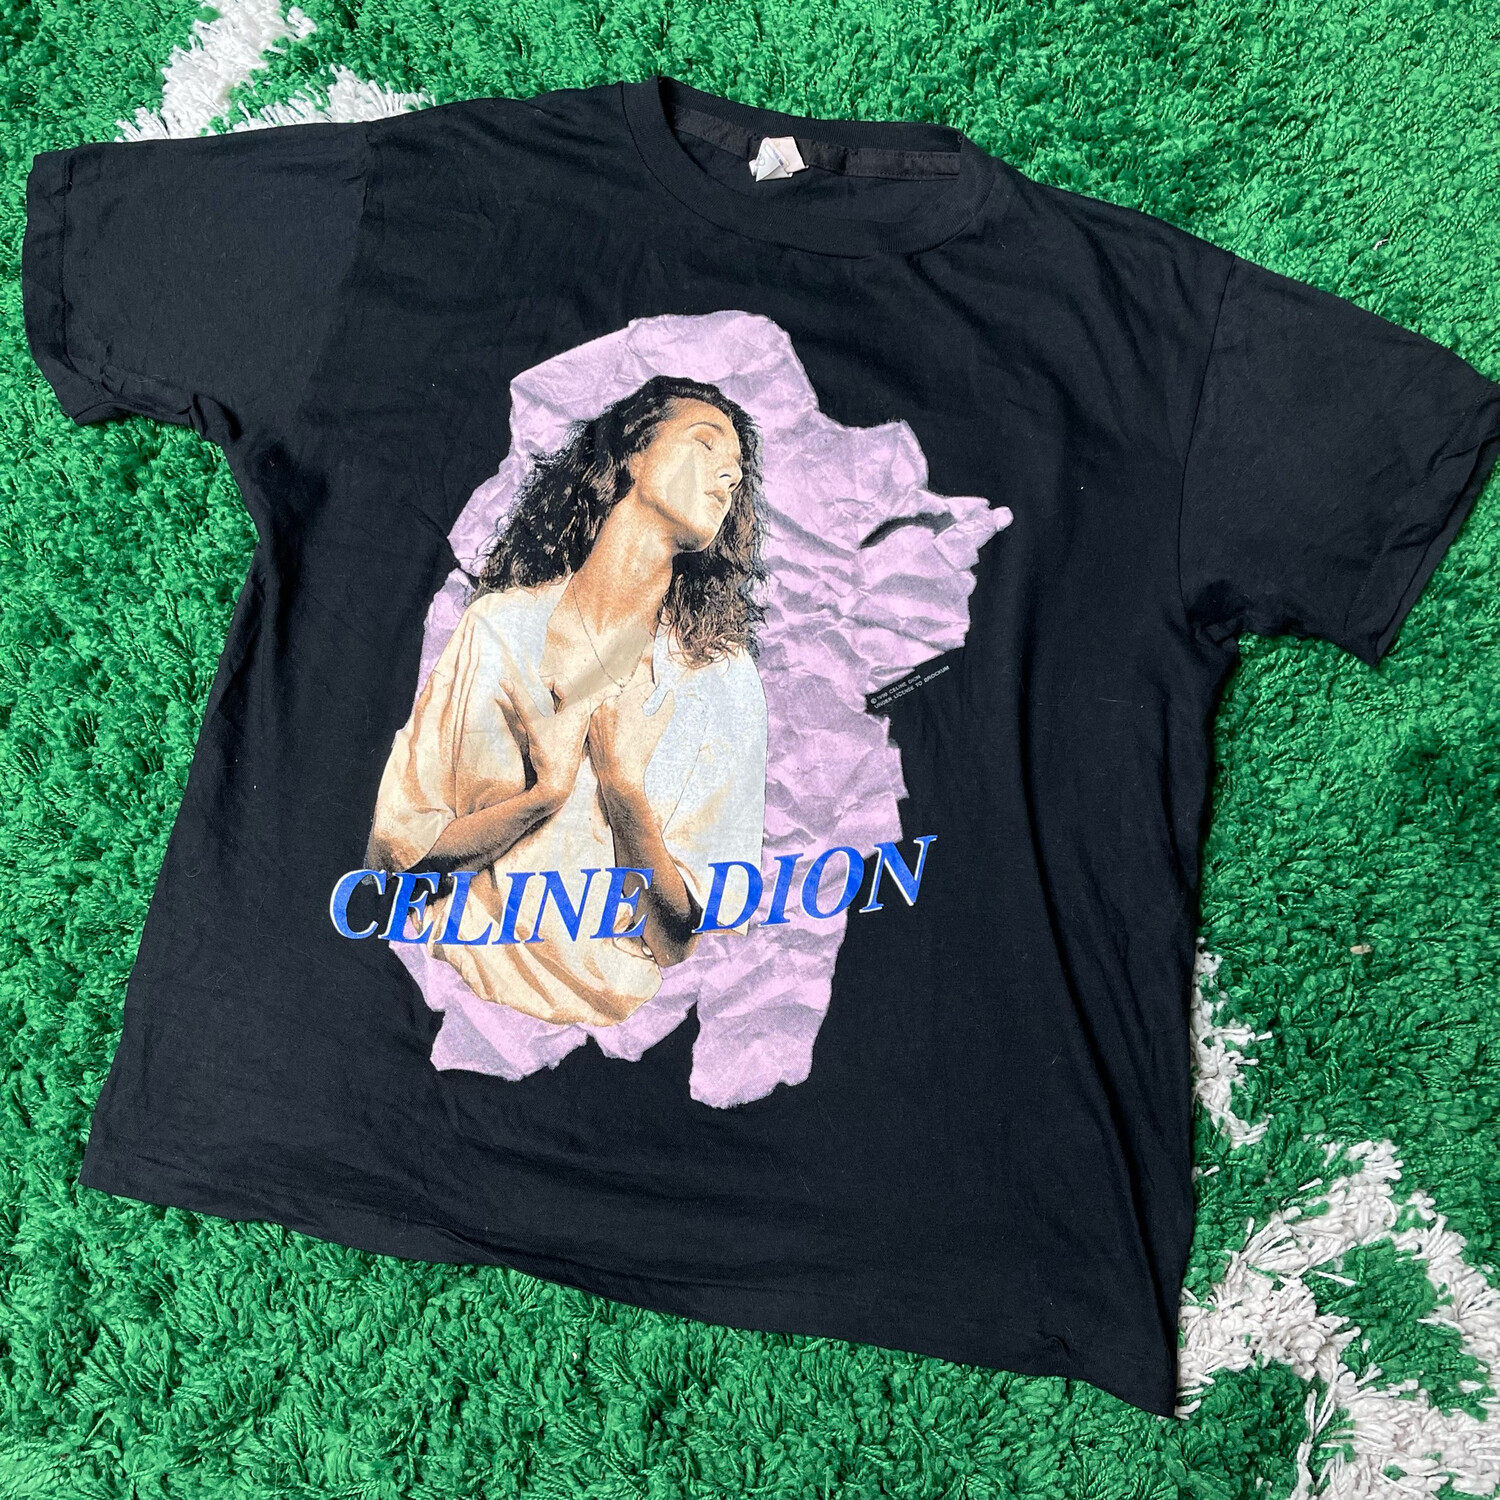 Celine Dion 1990 Tee Size Small